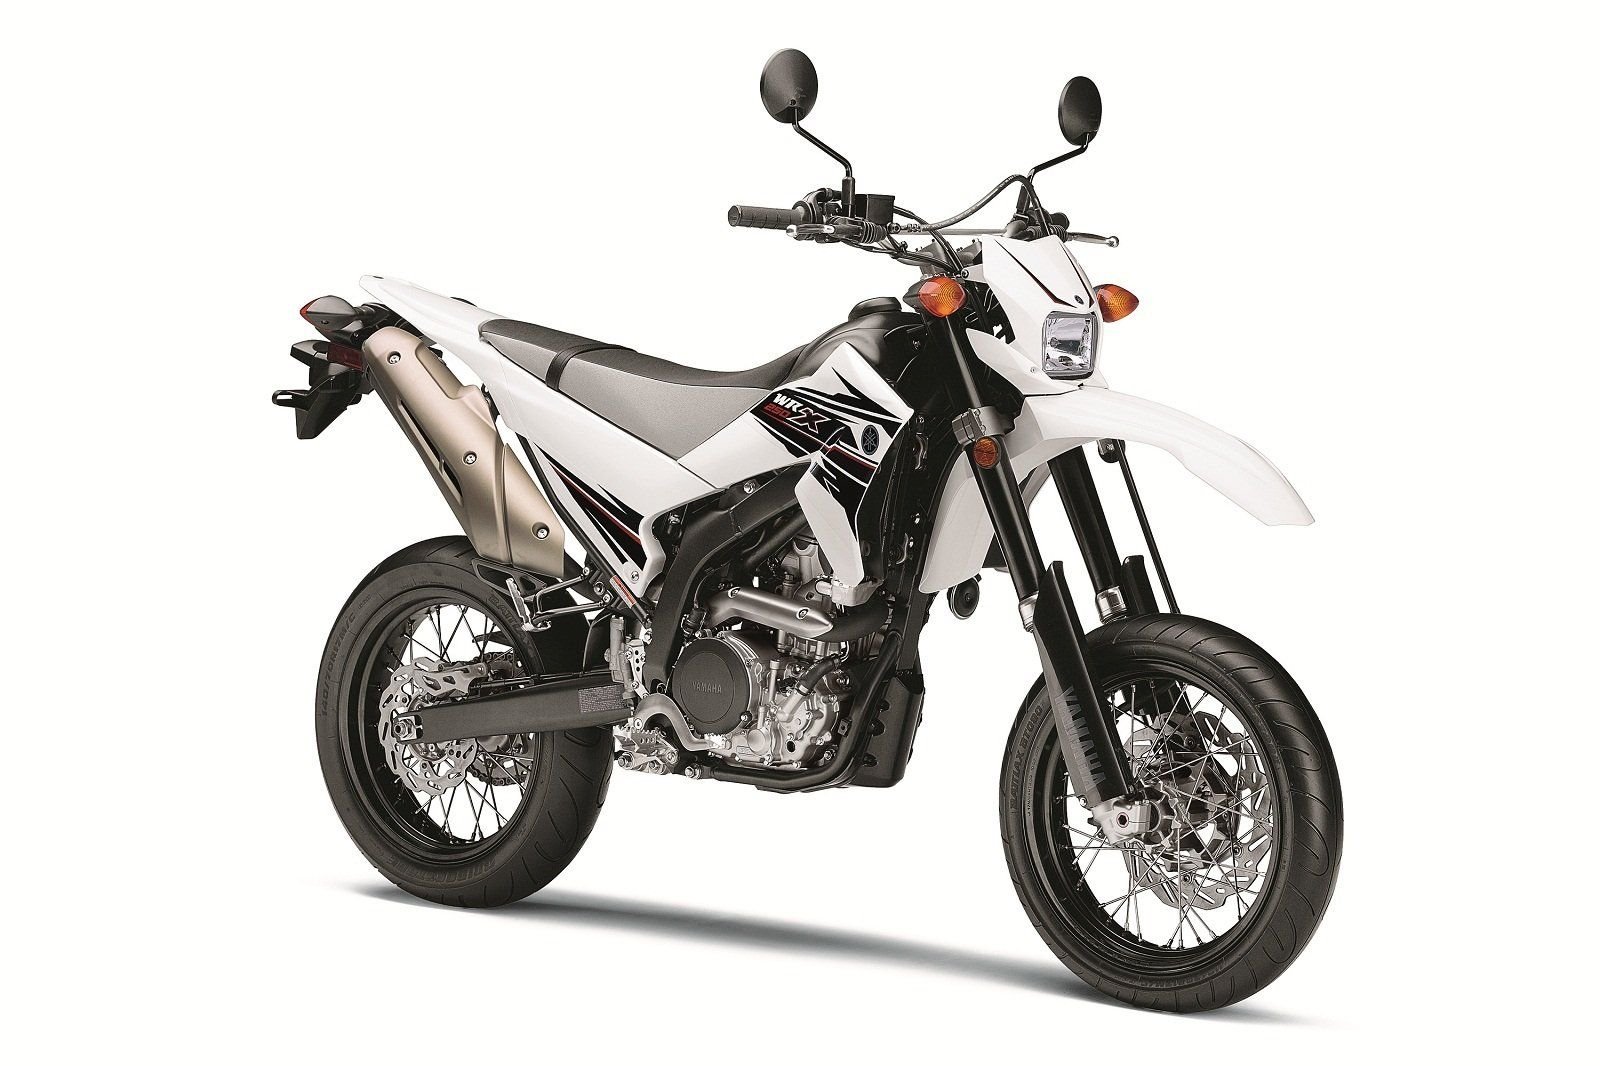 Yamaha WR250X Picture, Photo, Wallpaper